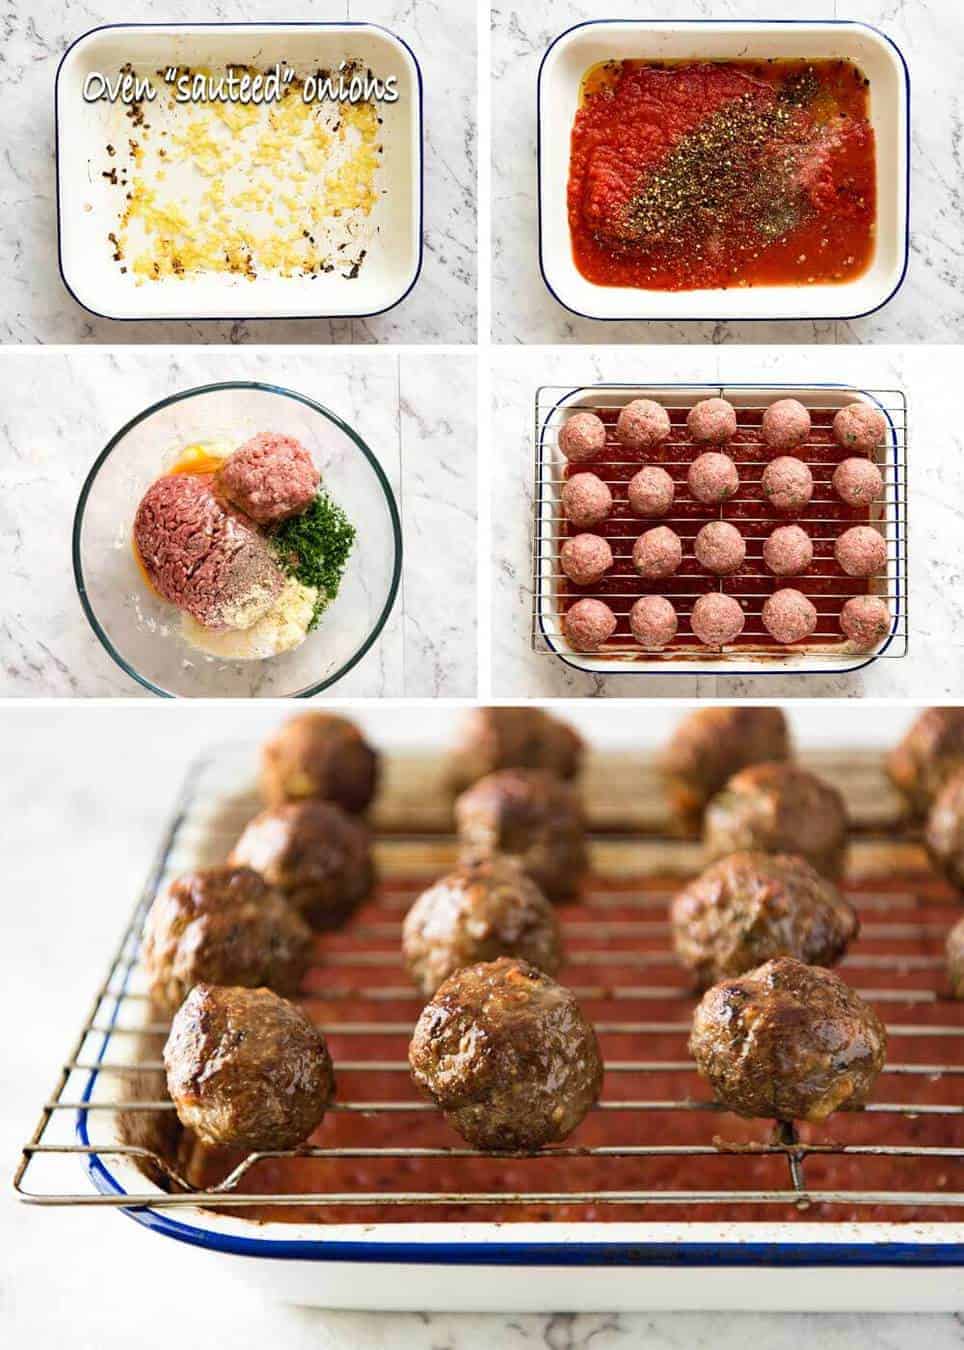 Both the Oven Baked Italian Meatballs AND sauce are made entirely in the oven! The meatballs are extra soft and juicy, and tomato sauce fantastic for pouring over pasta. www.recipetineats.com